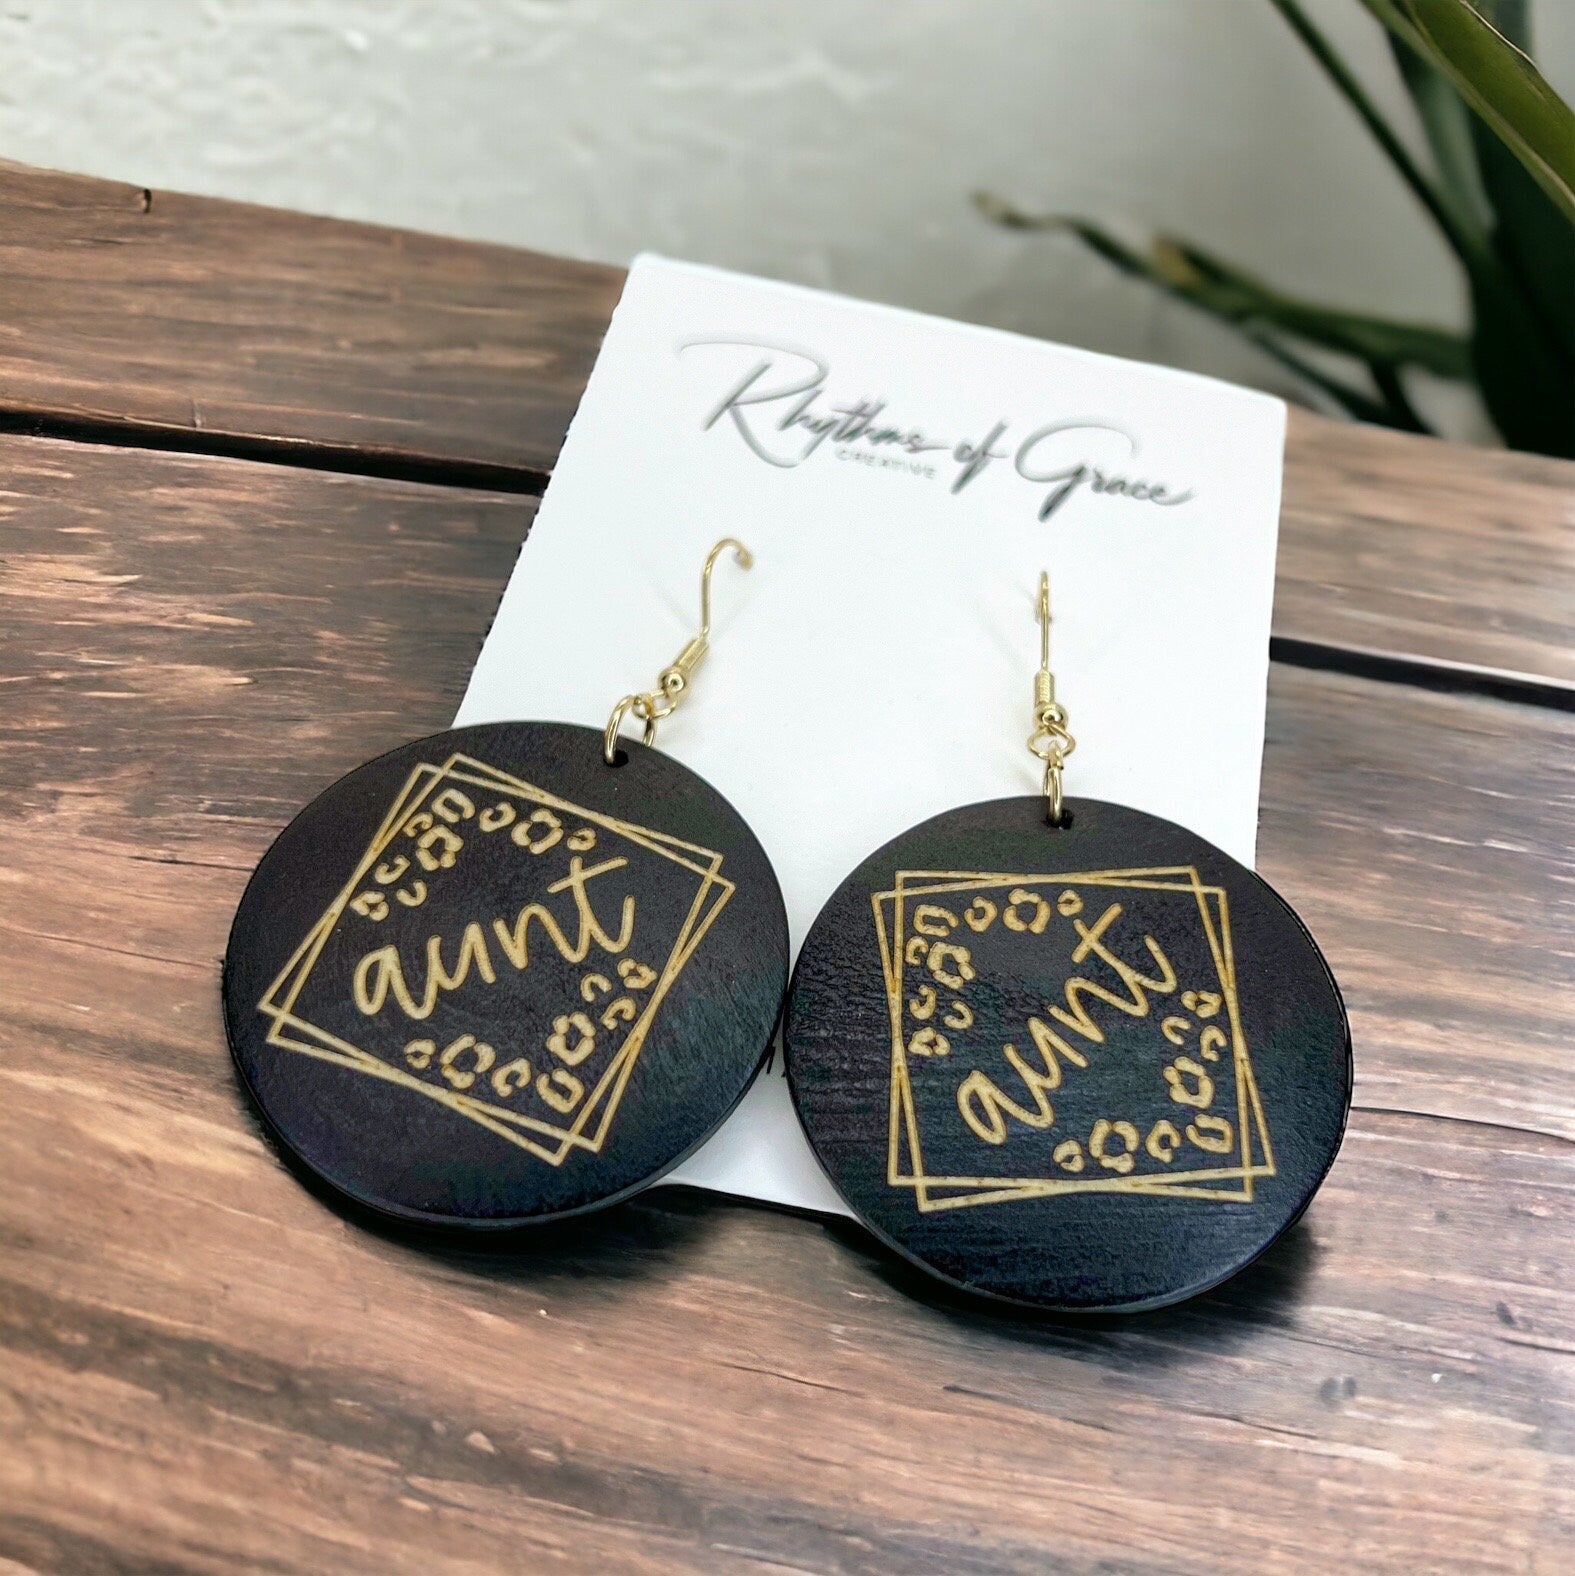 Aunt Earrings - Auntie Earrings, Aunt Gift, Aunt Accessories, Boho Chic, Aunt Life, Aunt Jewelry, Handmade Earrings, Handmade Jewelry